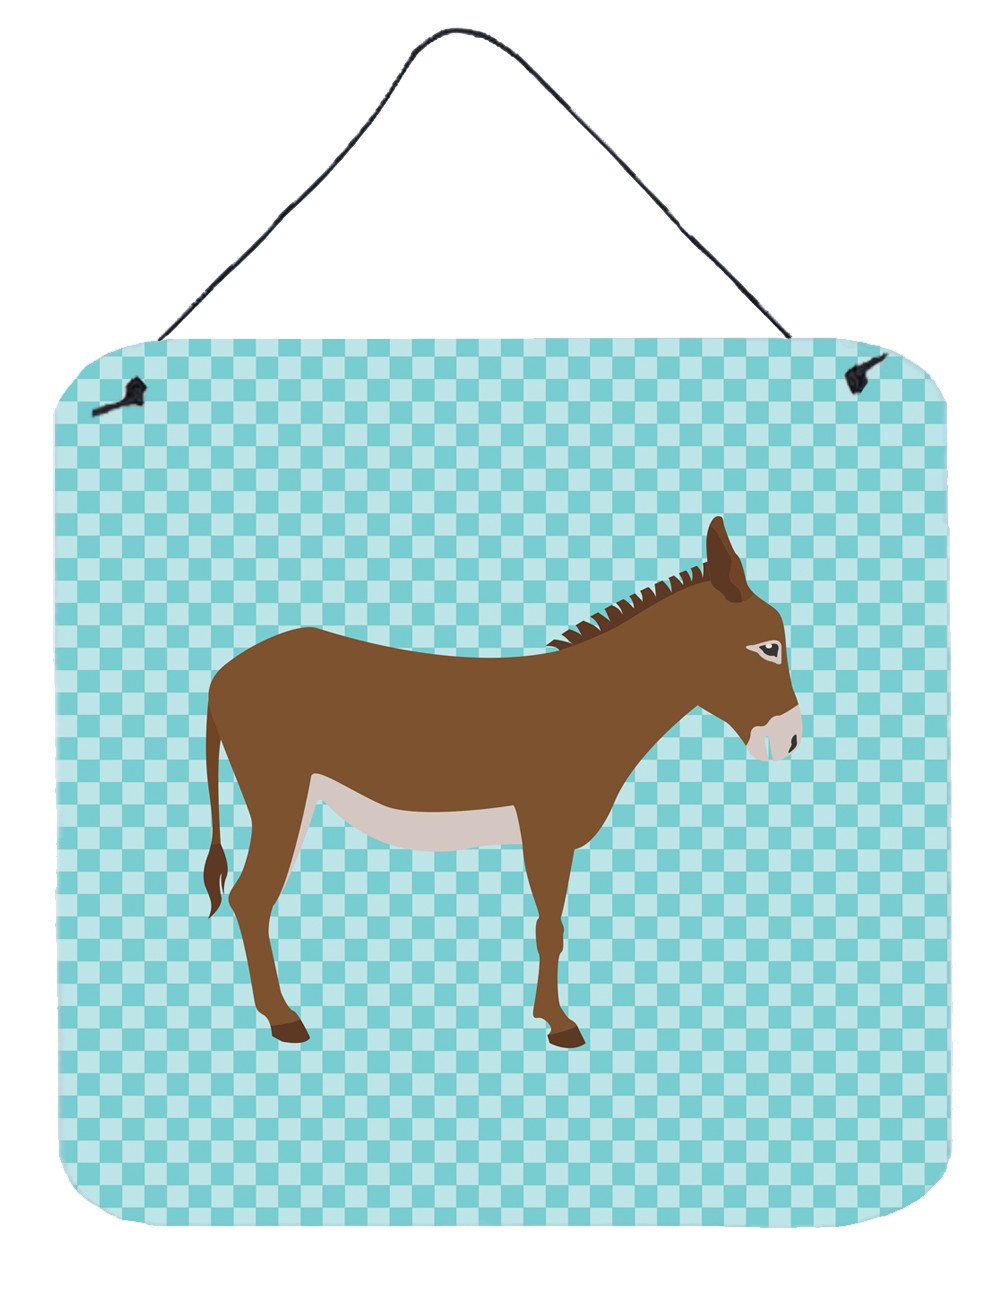 Cotentin Donkey Blue Check Wall or Door Hanging Prints BB8023DS66 by Caroline's Treasures